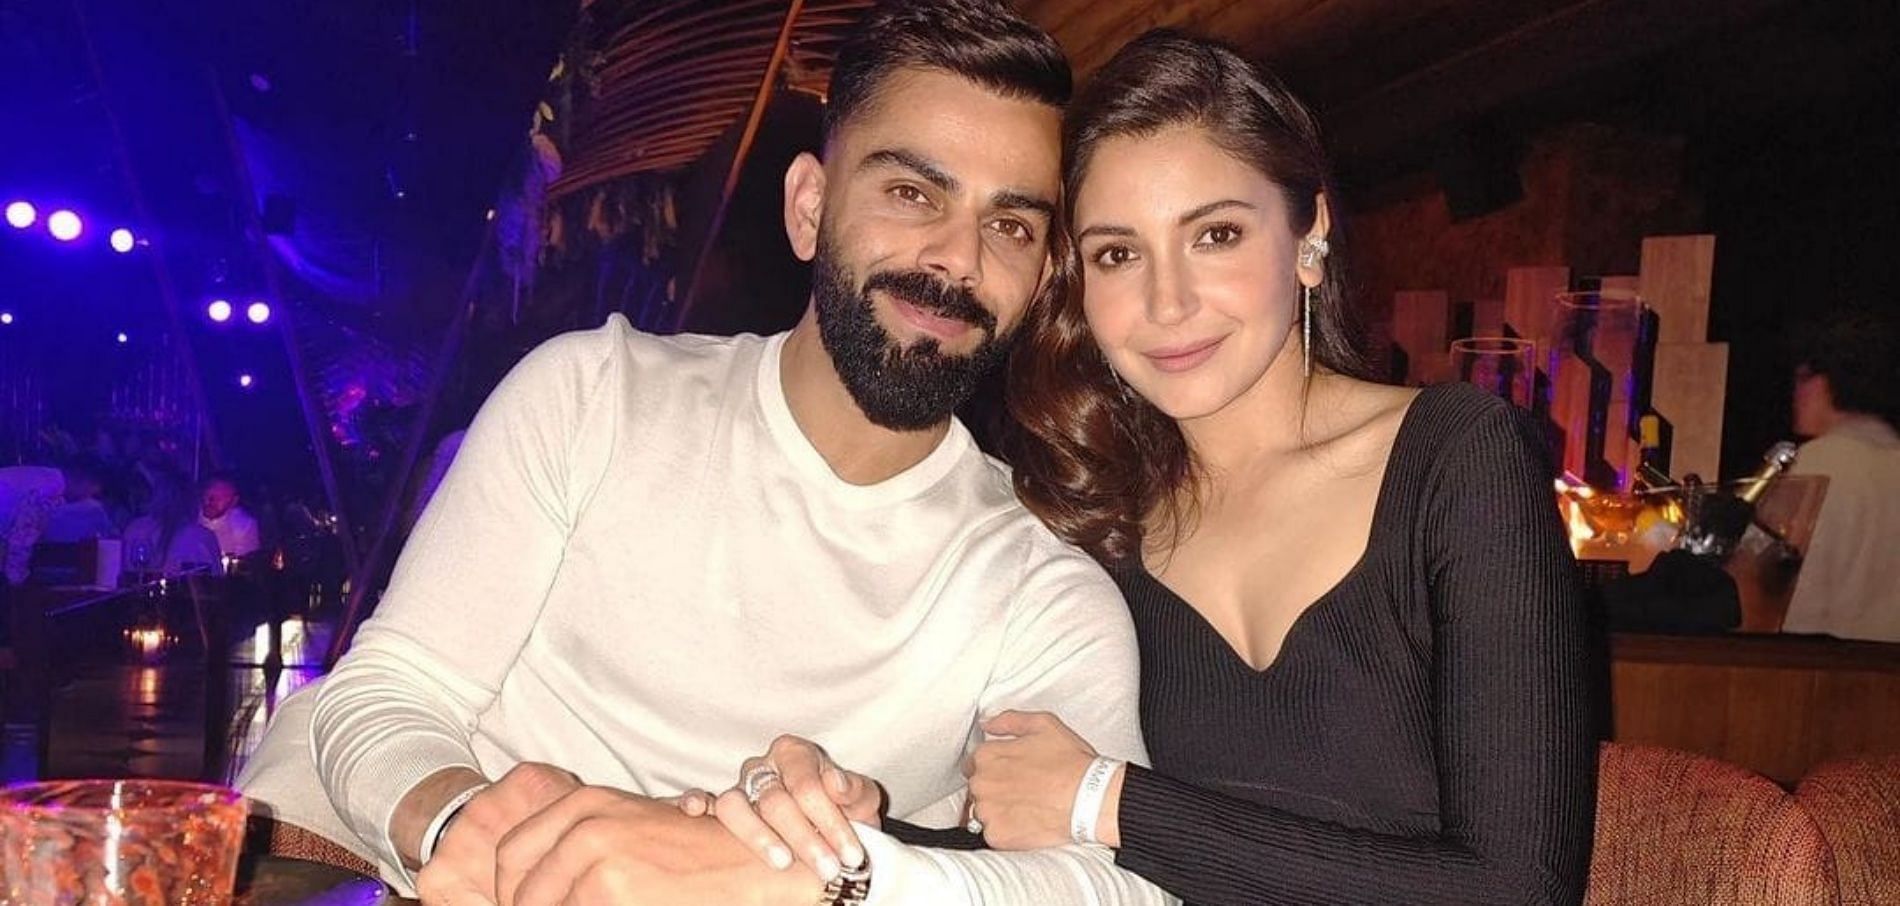 Viral video claims Virat Kohli showed a glimpse of hurricane in Barbados to Anushka Sharma on a video call